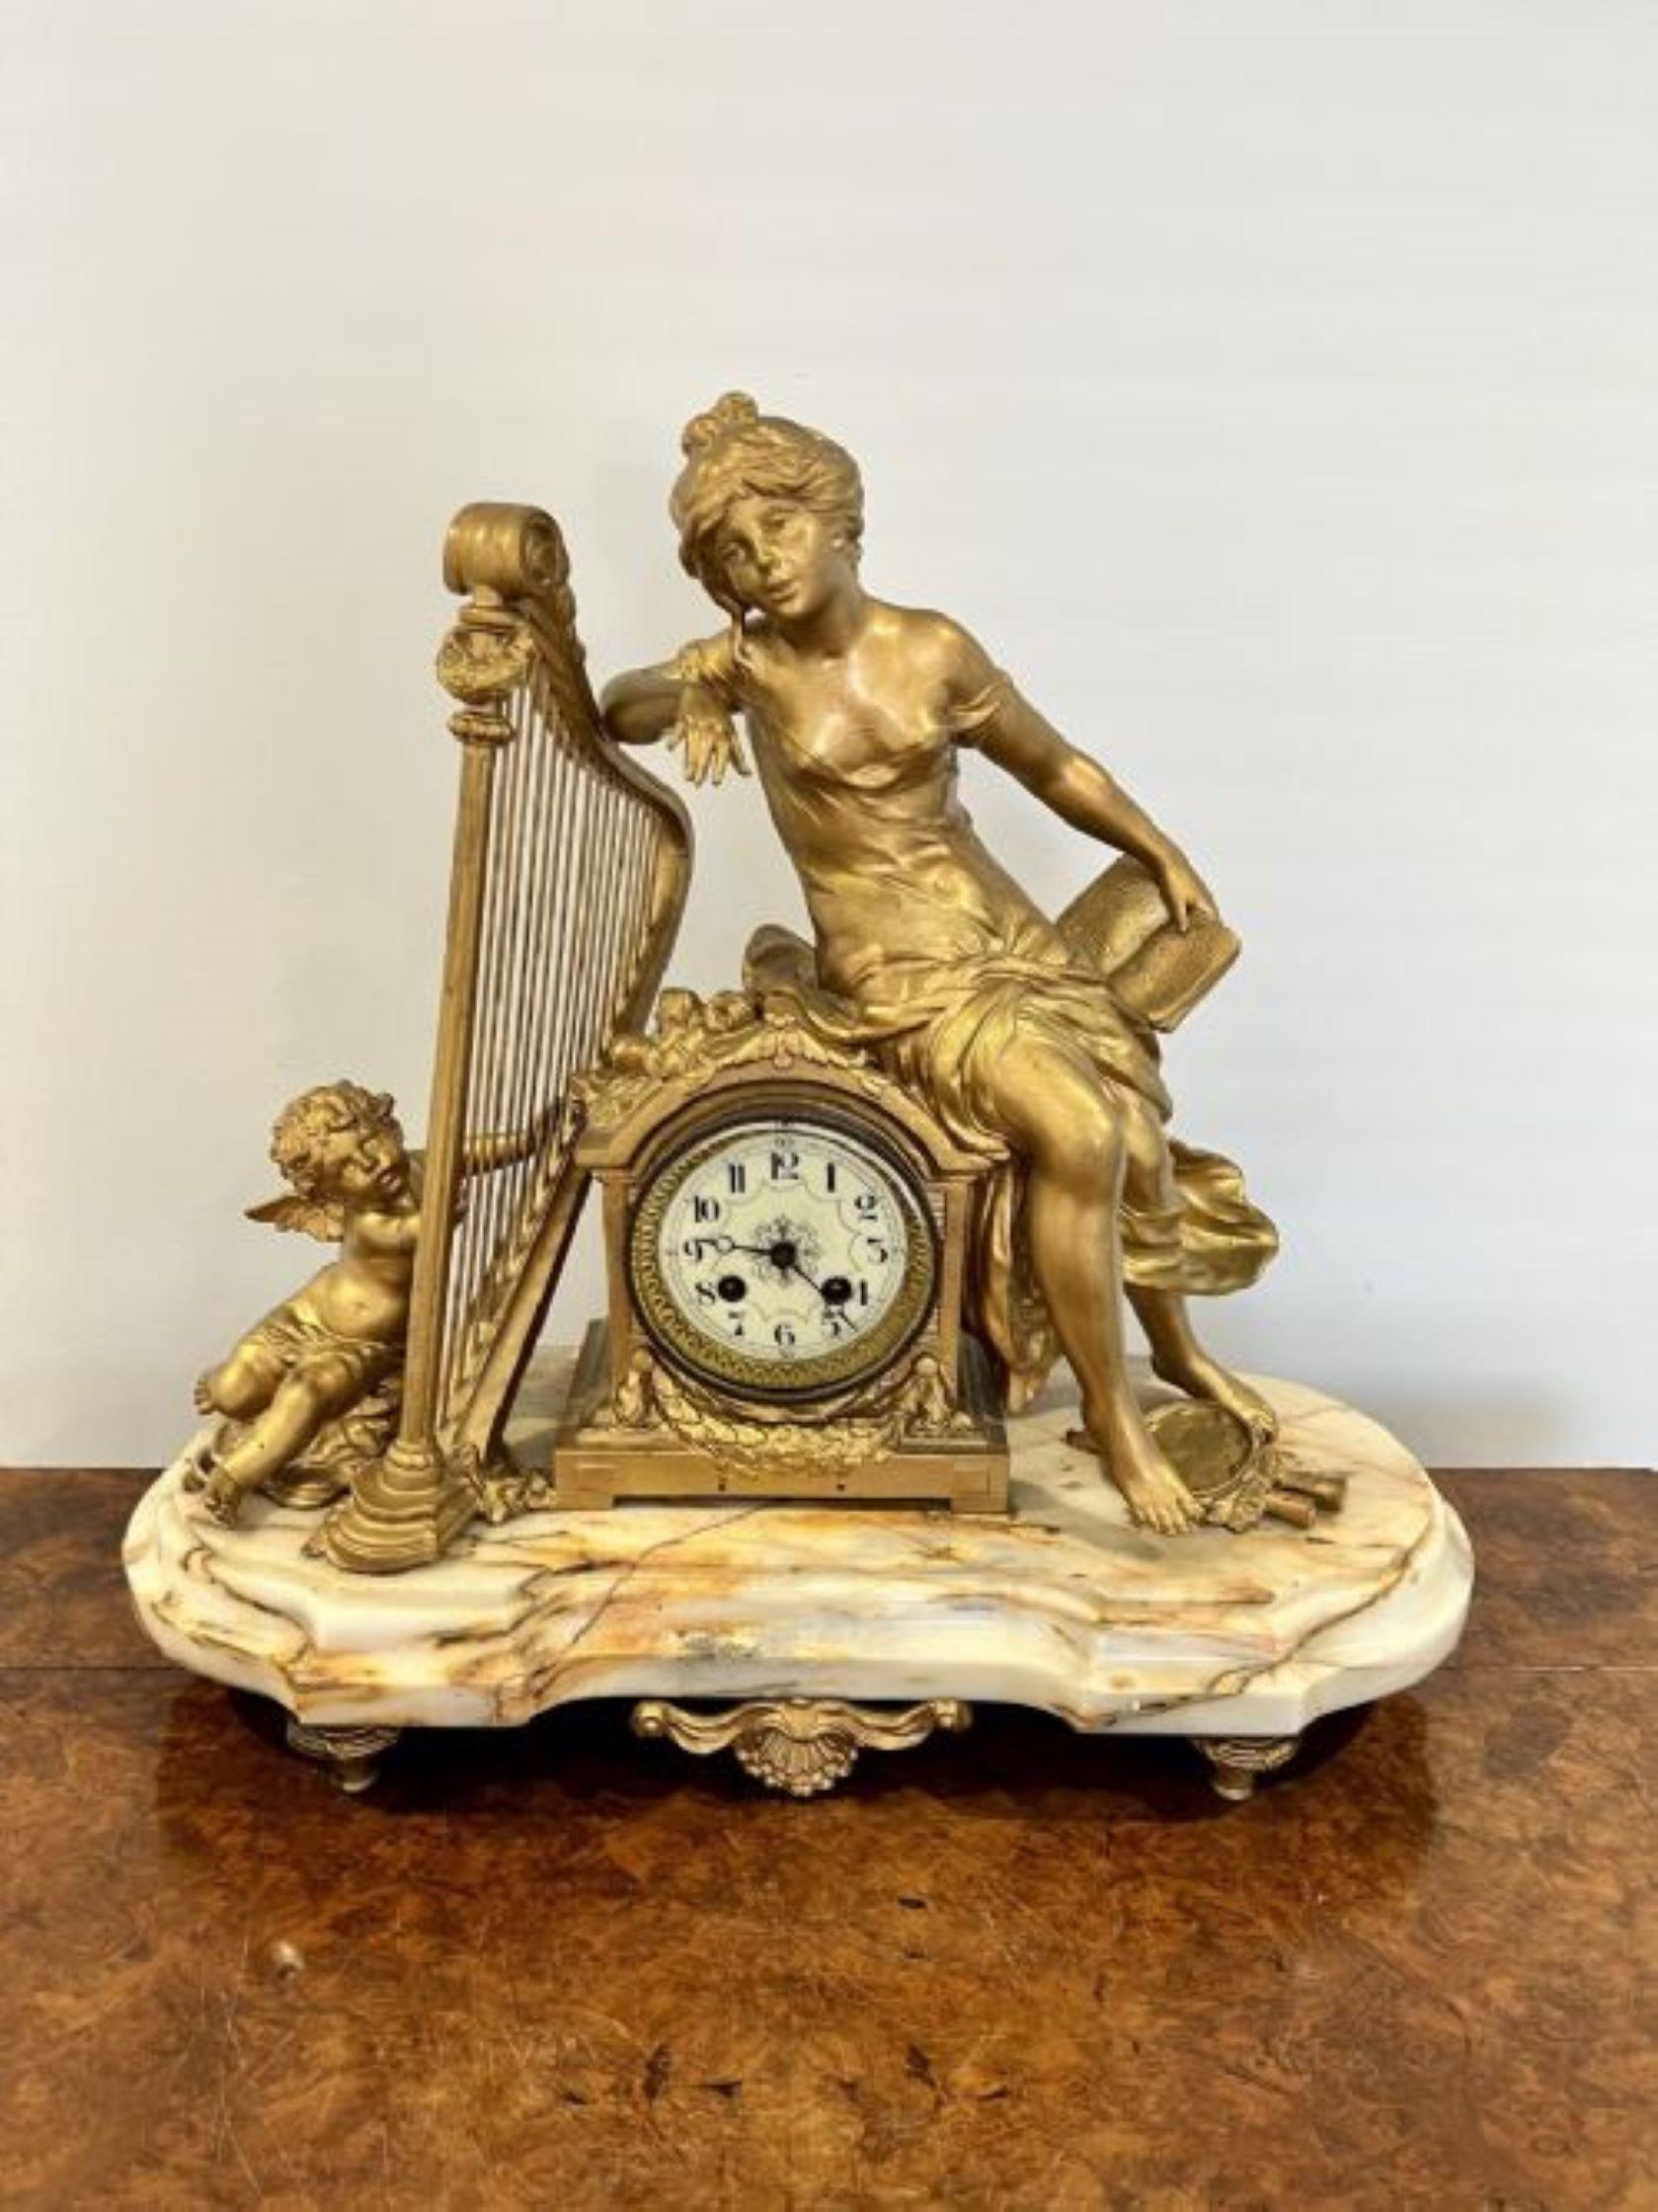 Fantastic quality large antique Victorian mantle clock, having outstanding quality gilded mounts of classical figures of a lady, cherub and a harp. The lady is sitting above a quality ornate French clock with a circular porcelain decorated dial with